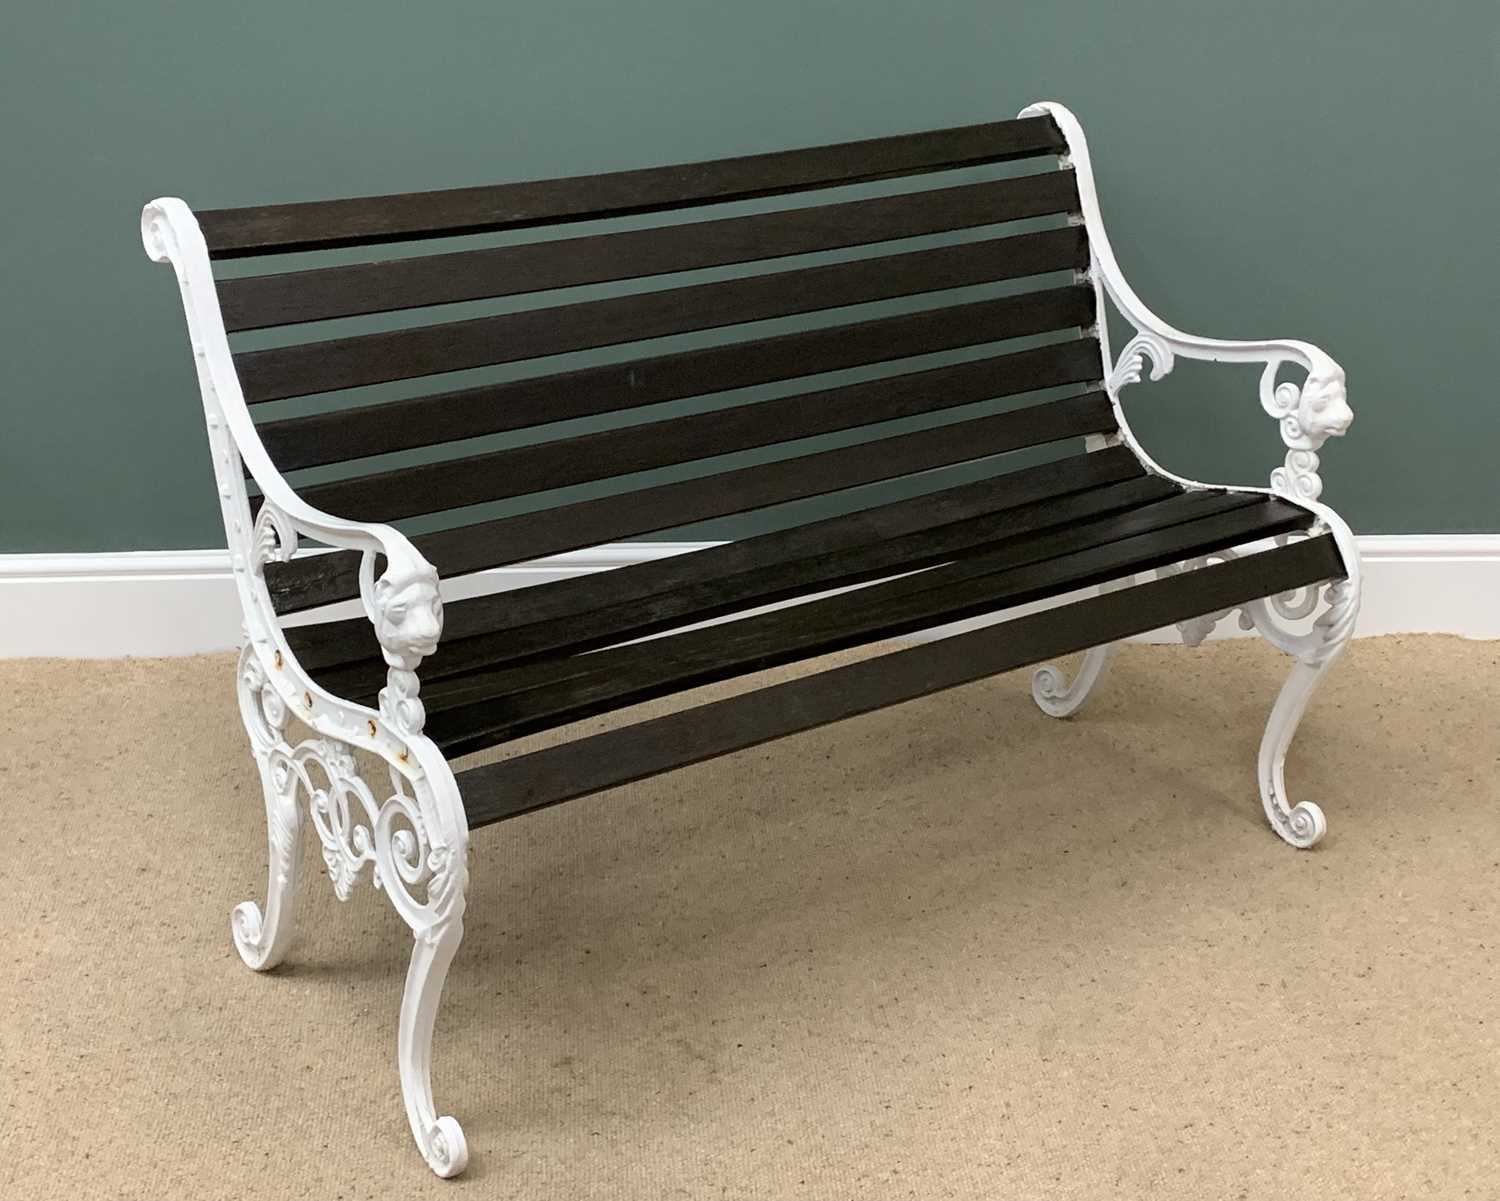 GARDEN BENCH - wooden slats and cast iron ends with Lion handles, 84cms H, 125cms W, 66cms D